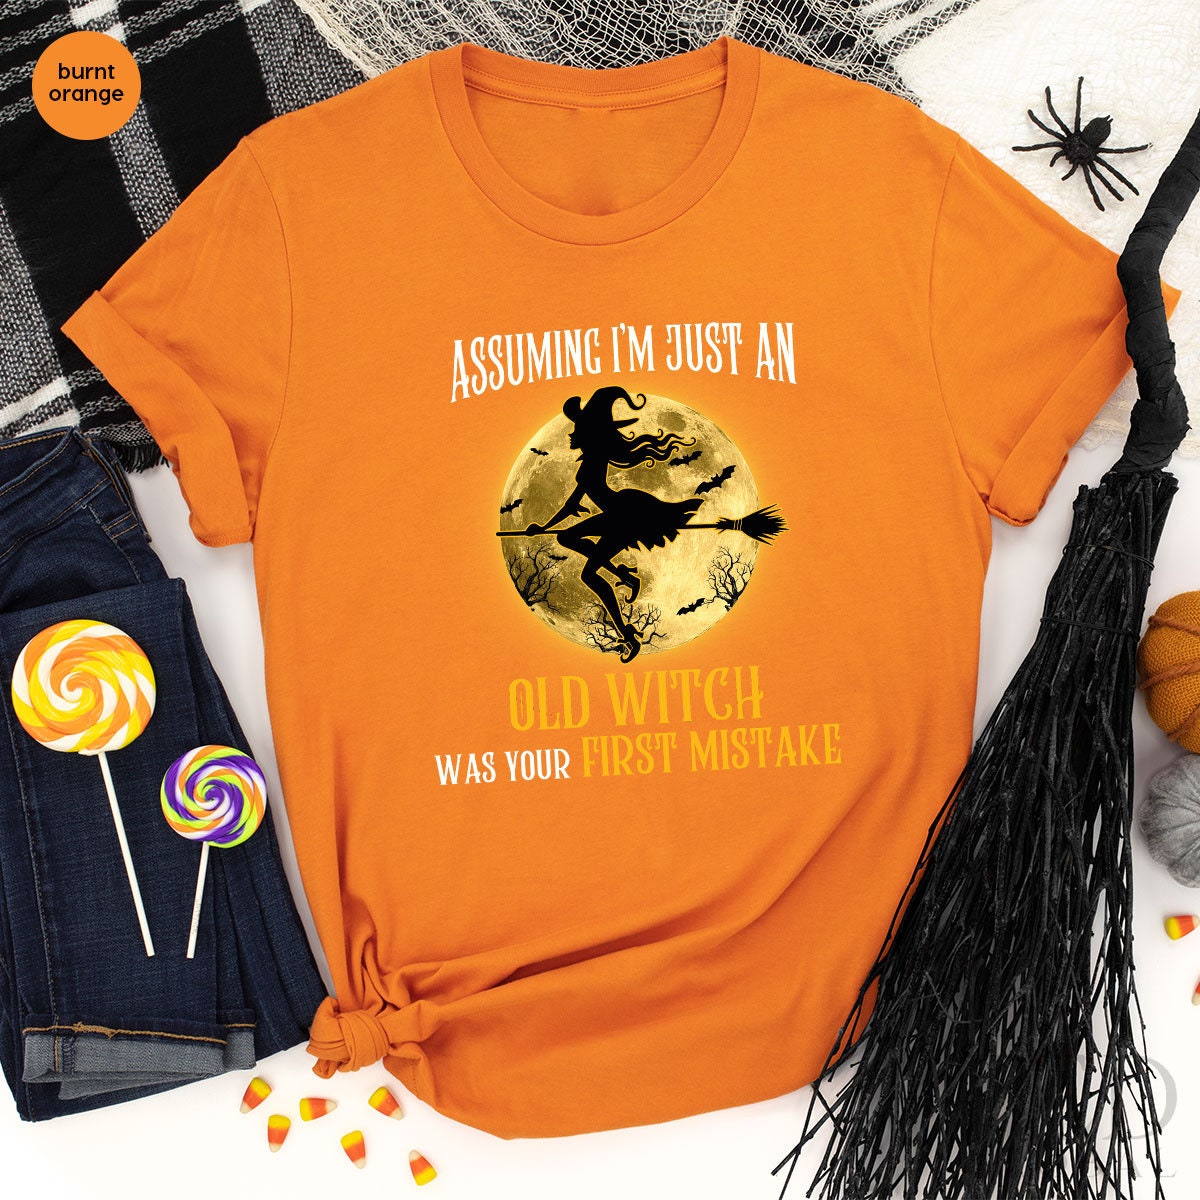 Halloween pumpkin face T-shirt Design Funny and Scary Halloween Tee for  Adult Men's & Women's - TshirtCare